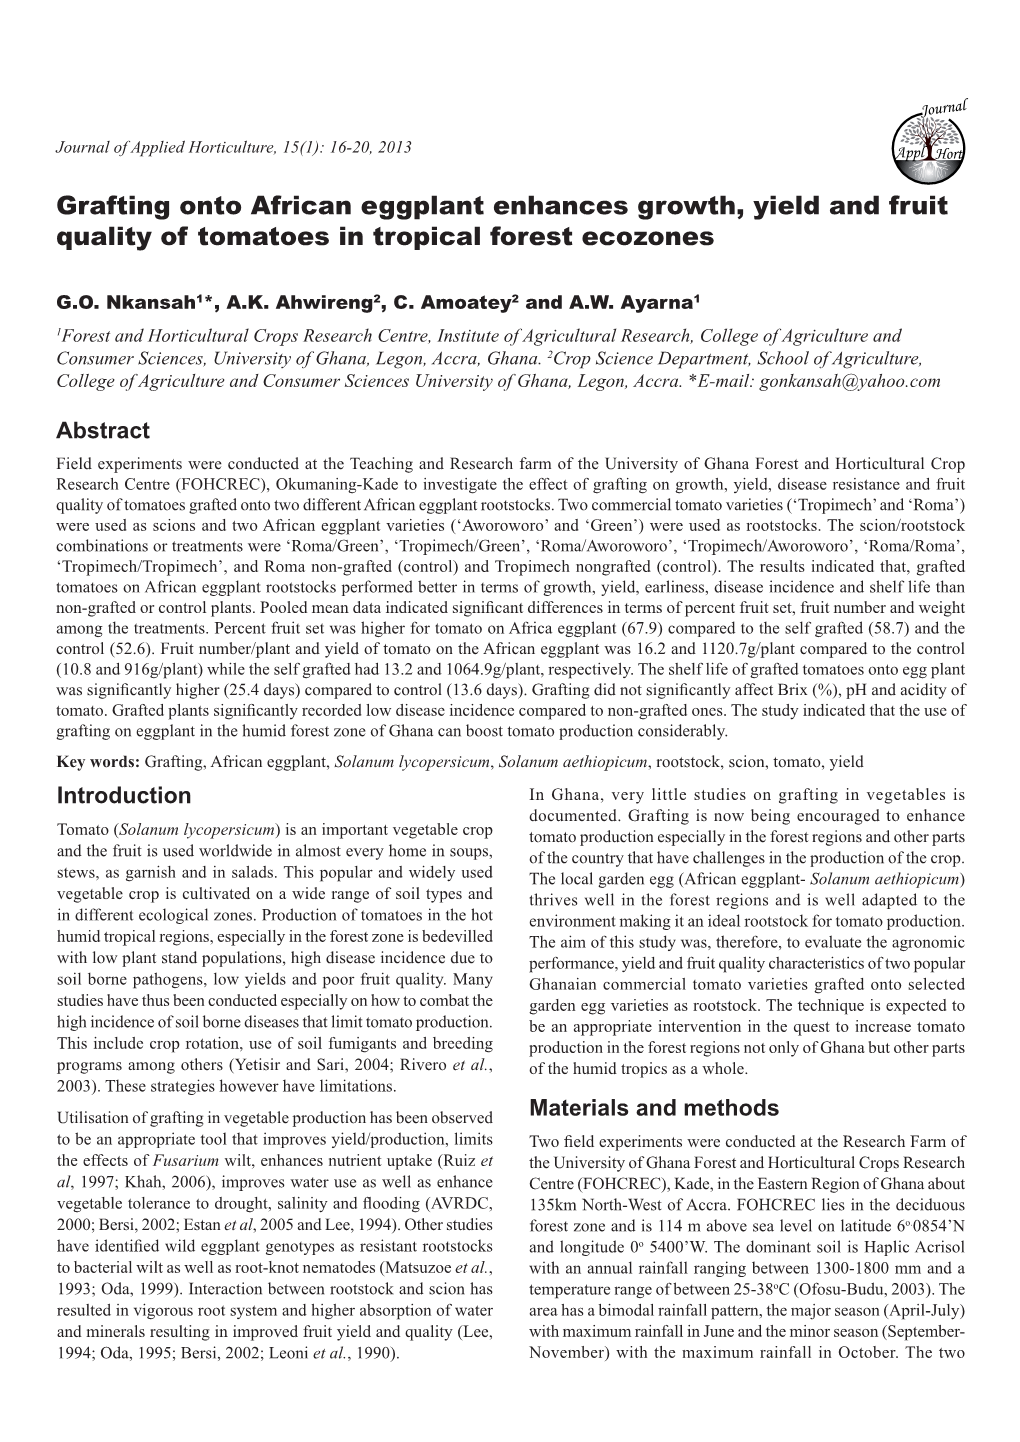 Grafting Onto African Eggplant Enhances Growth, Yield and Fruit Quality of Tomatoes in Tropical Forest Ecozones